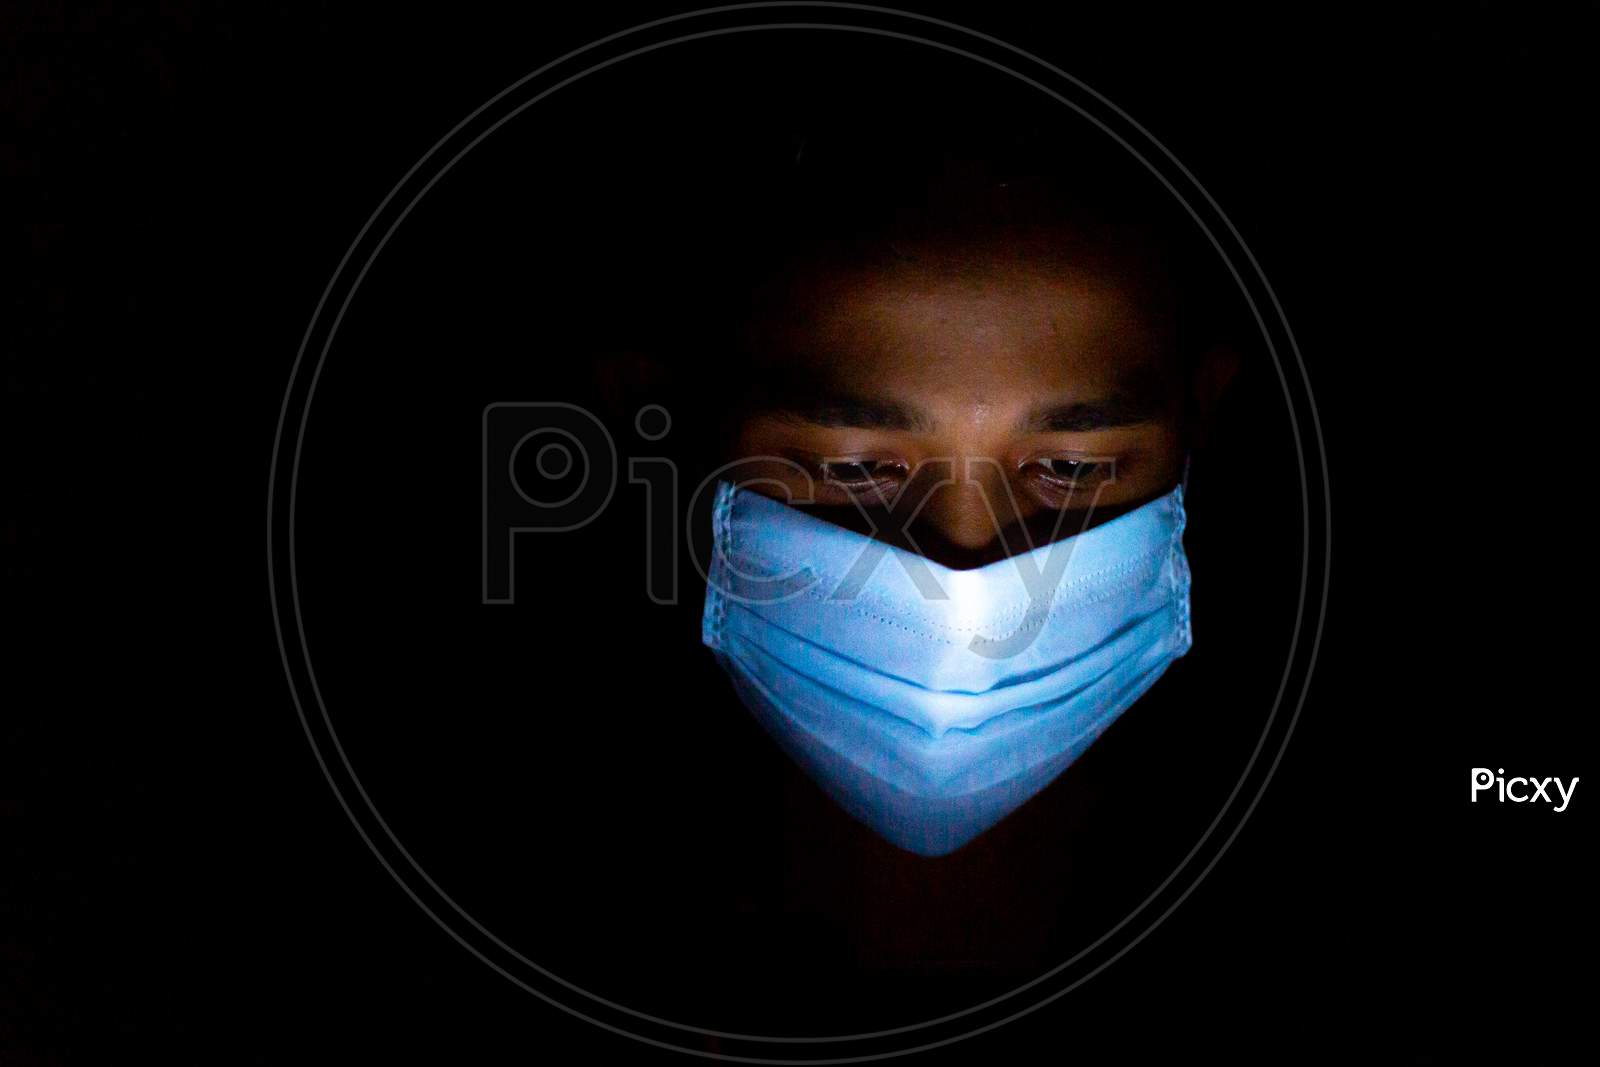 A Blue Surgical Mask-Wearing Young Man Was Playing Smartphone Games At Dhaka.